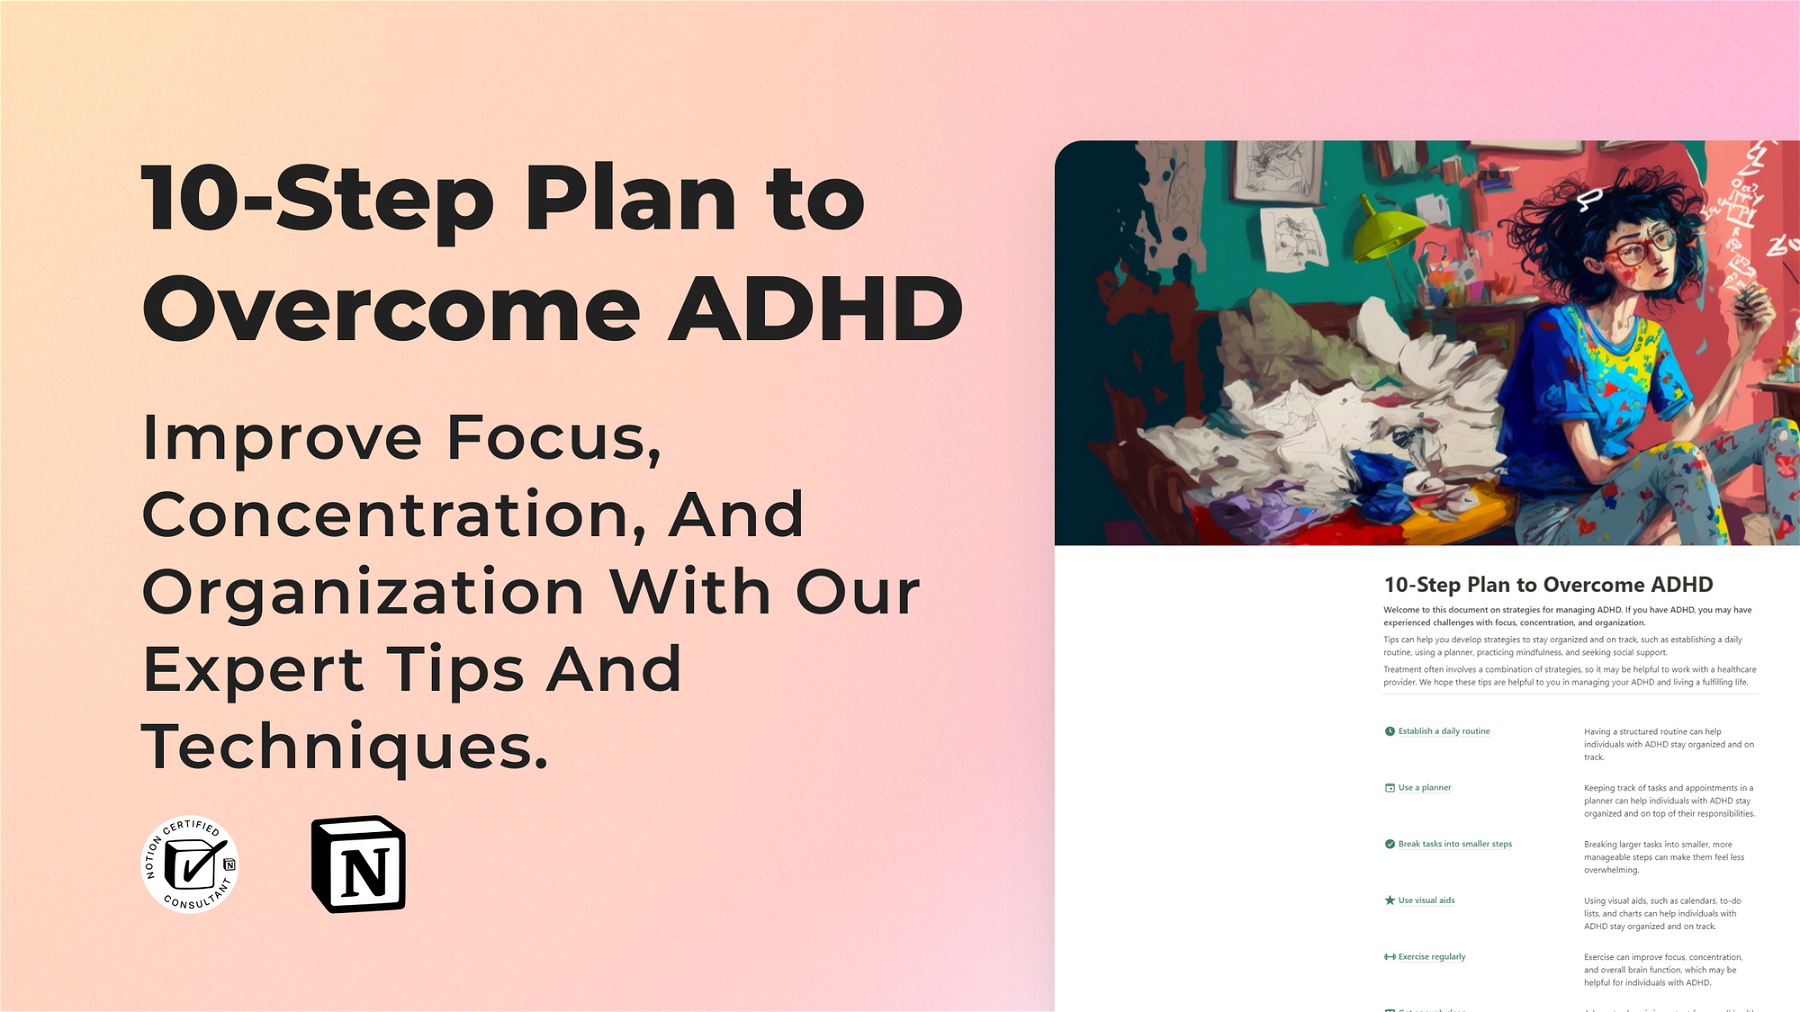 🧠 Transform ADHD challenges into opportunities - 10-Step Plan to Overcome ADHD